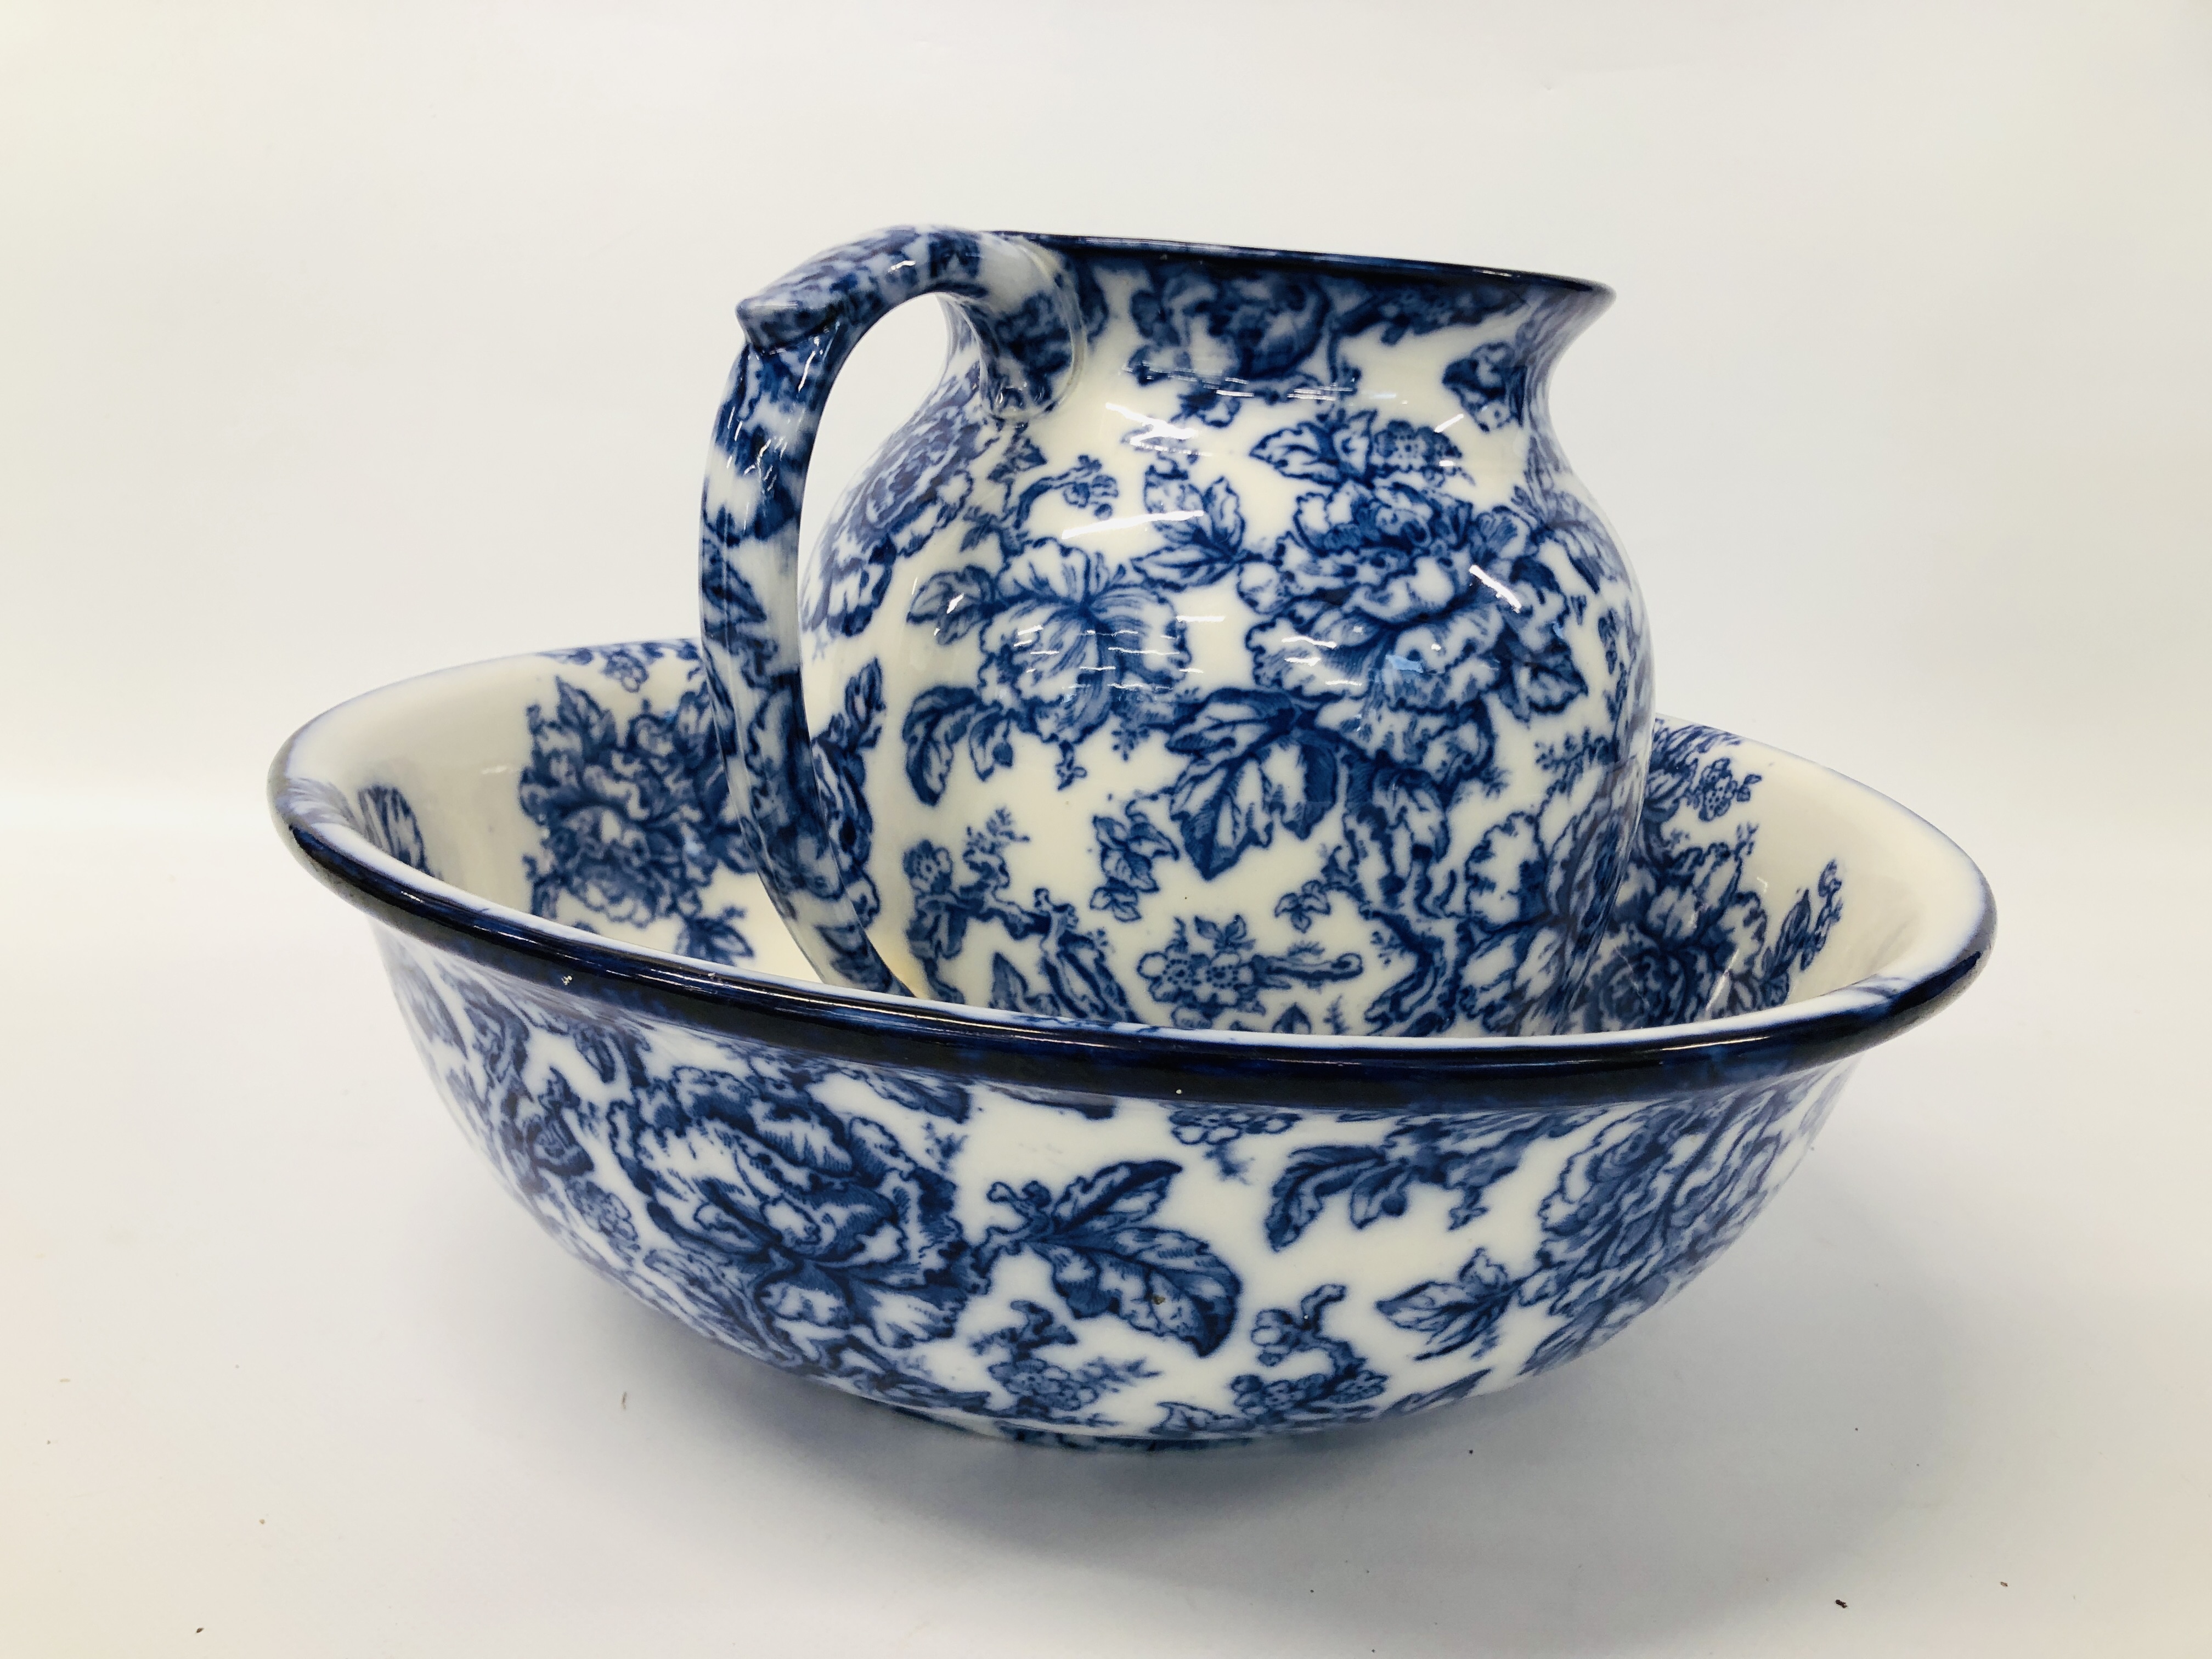 LOSOL WARE "CAVENDISH" BLUE AND WHITE ROSE DECORATED WASH JUG AND BOWL ALONG WITH A "BOOTHS" - Image 10 of 11